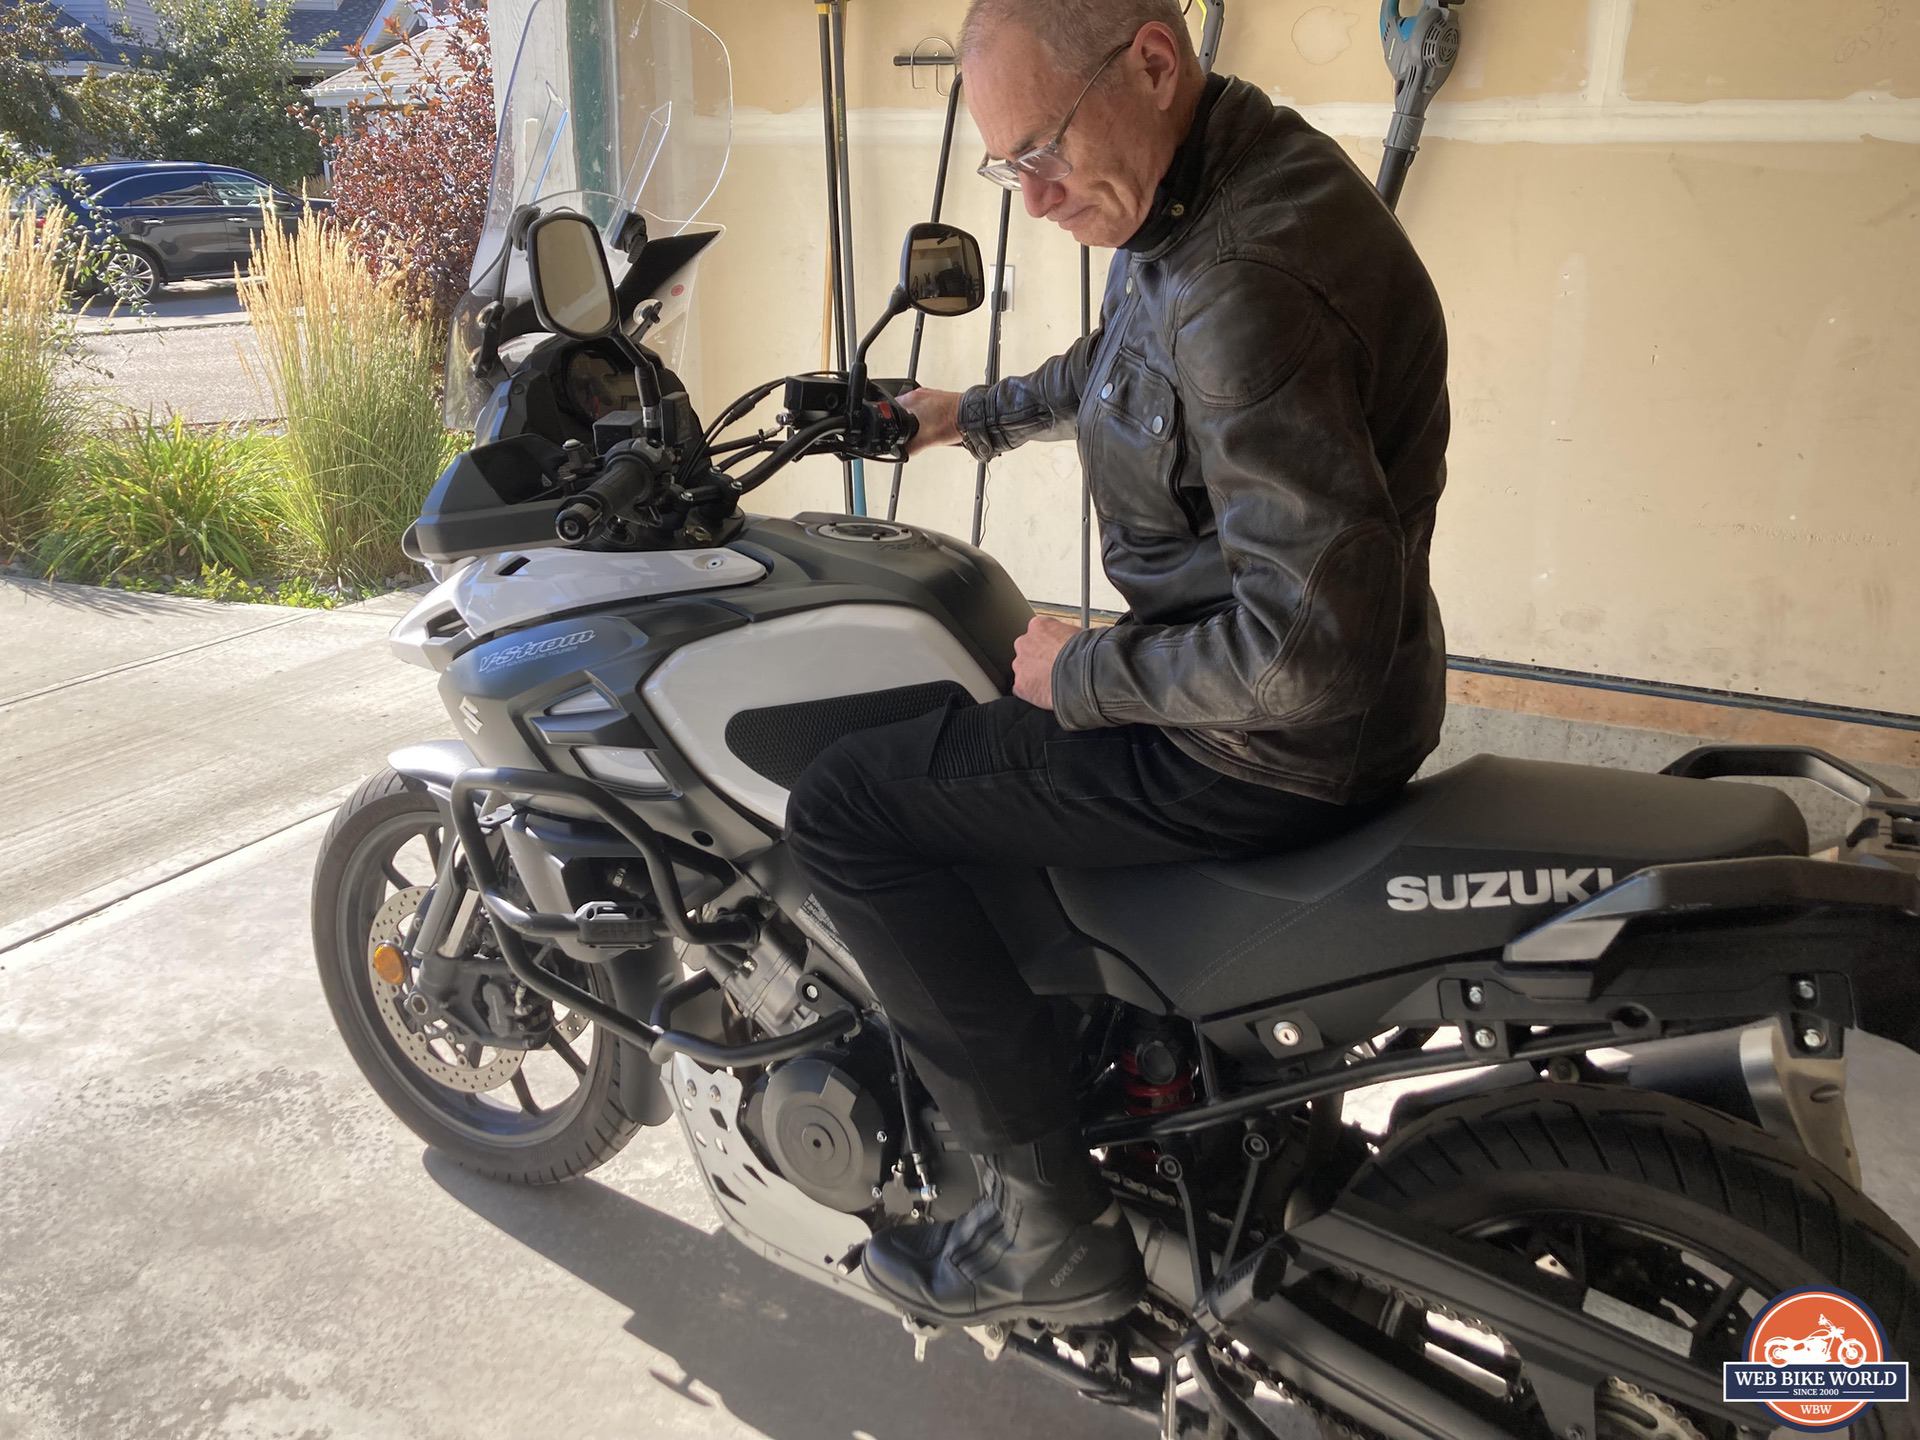 Author wearing Daytona Road Star GTX Boots while seated on motorcycle